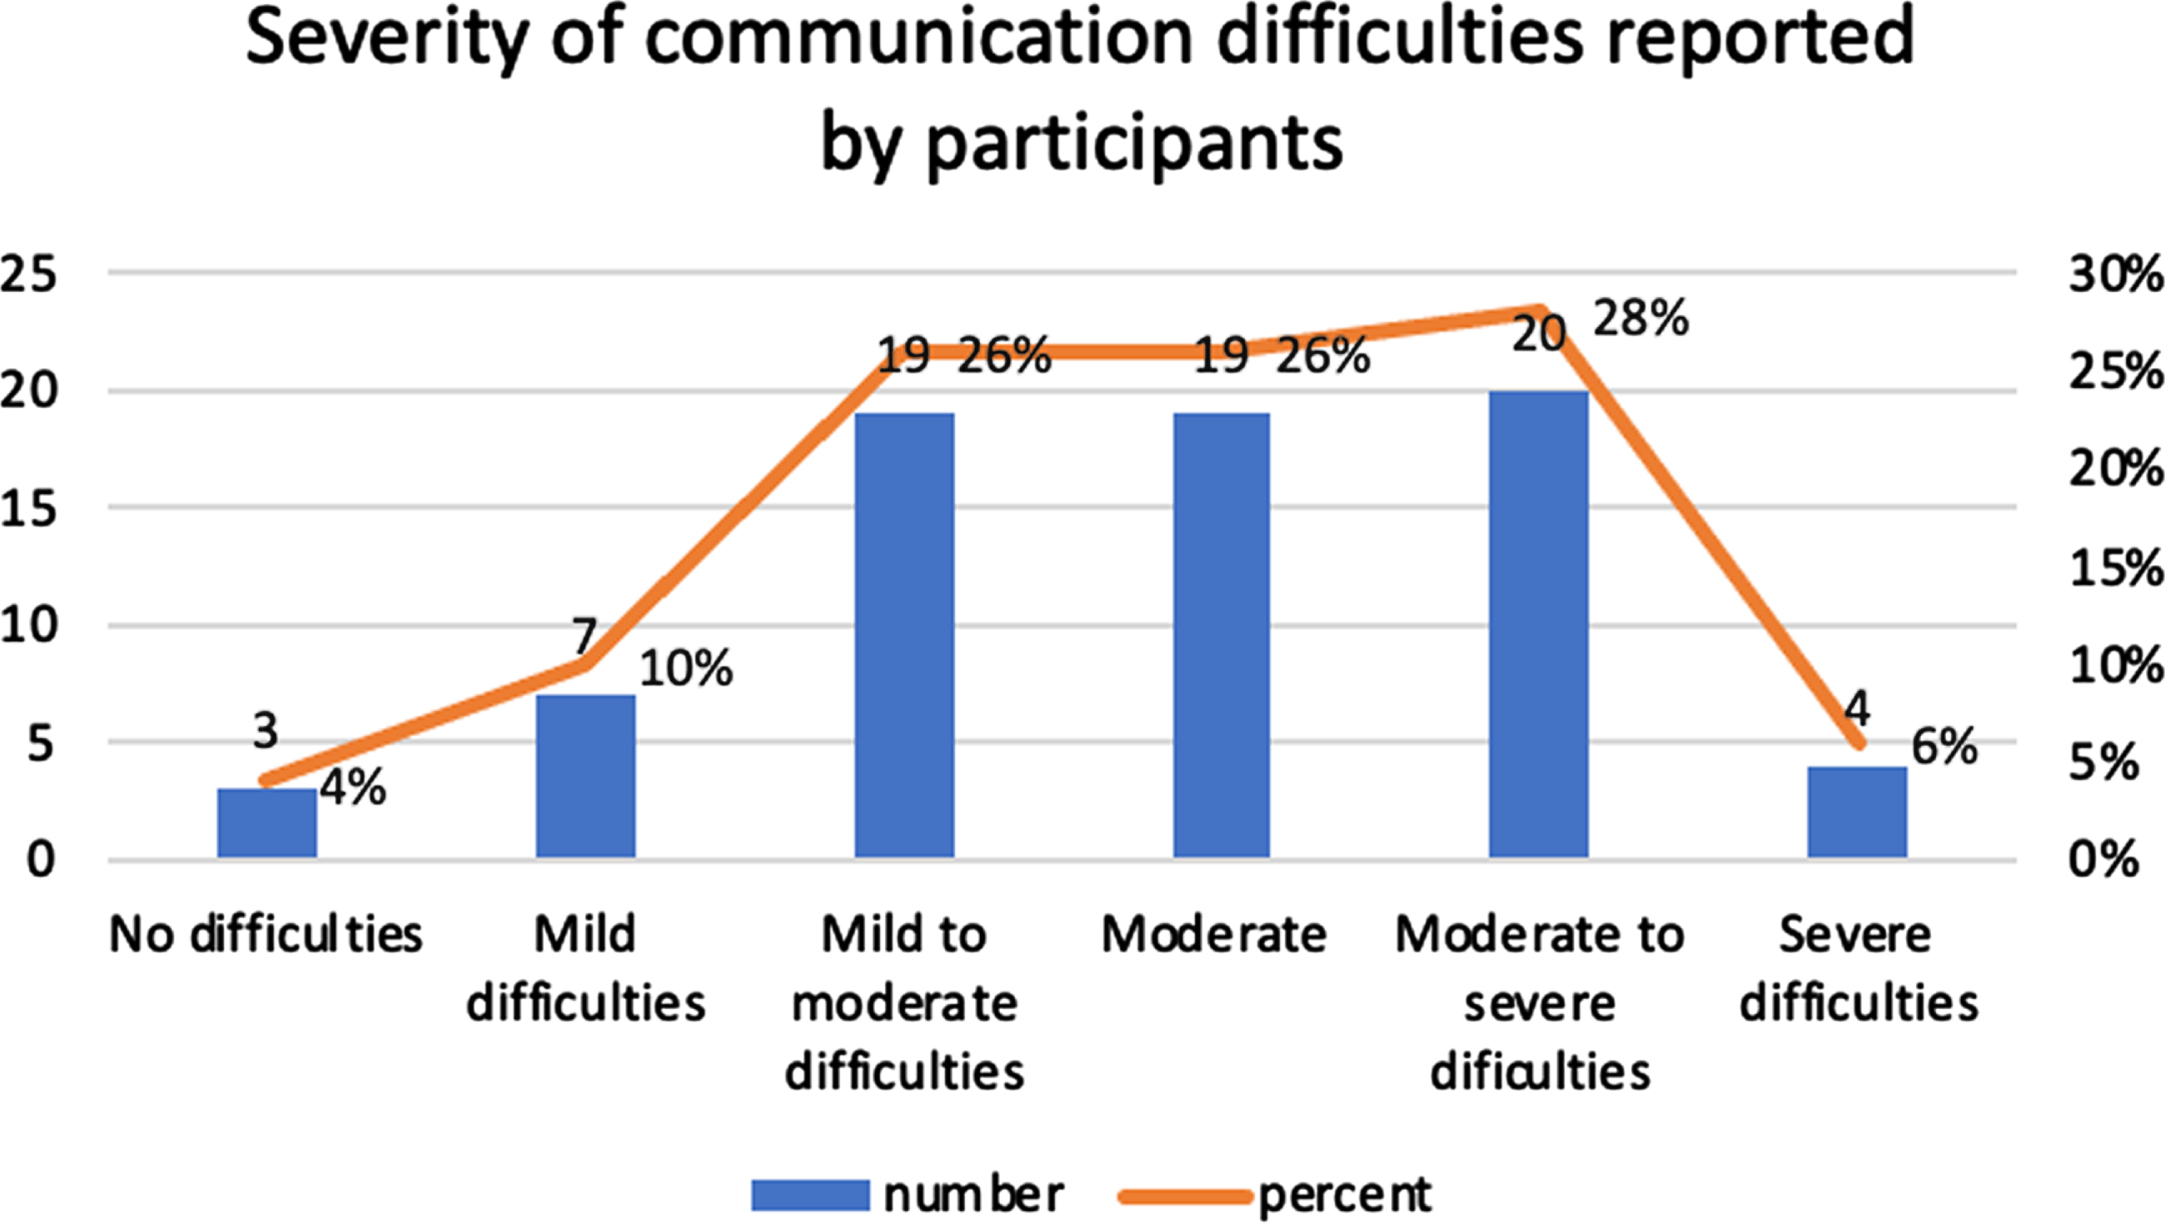 Severity of communication difficulties reported by participants.